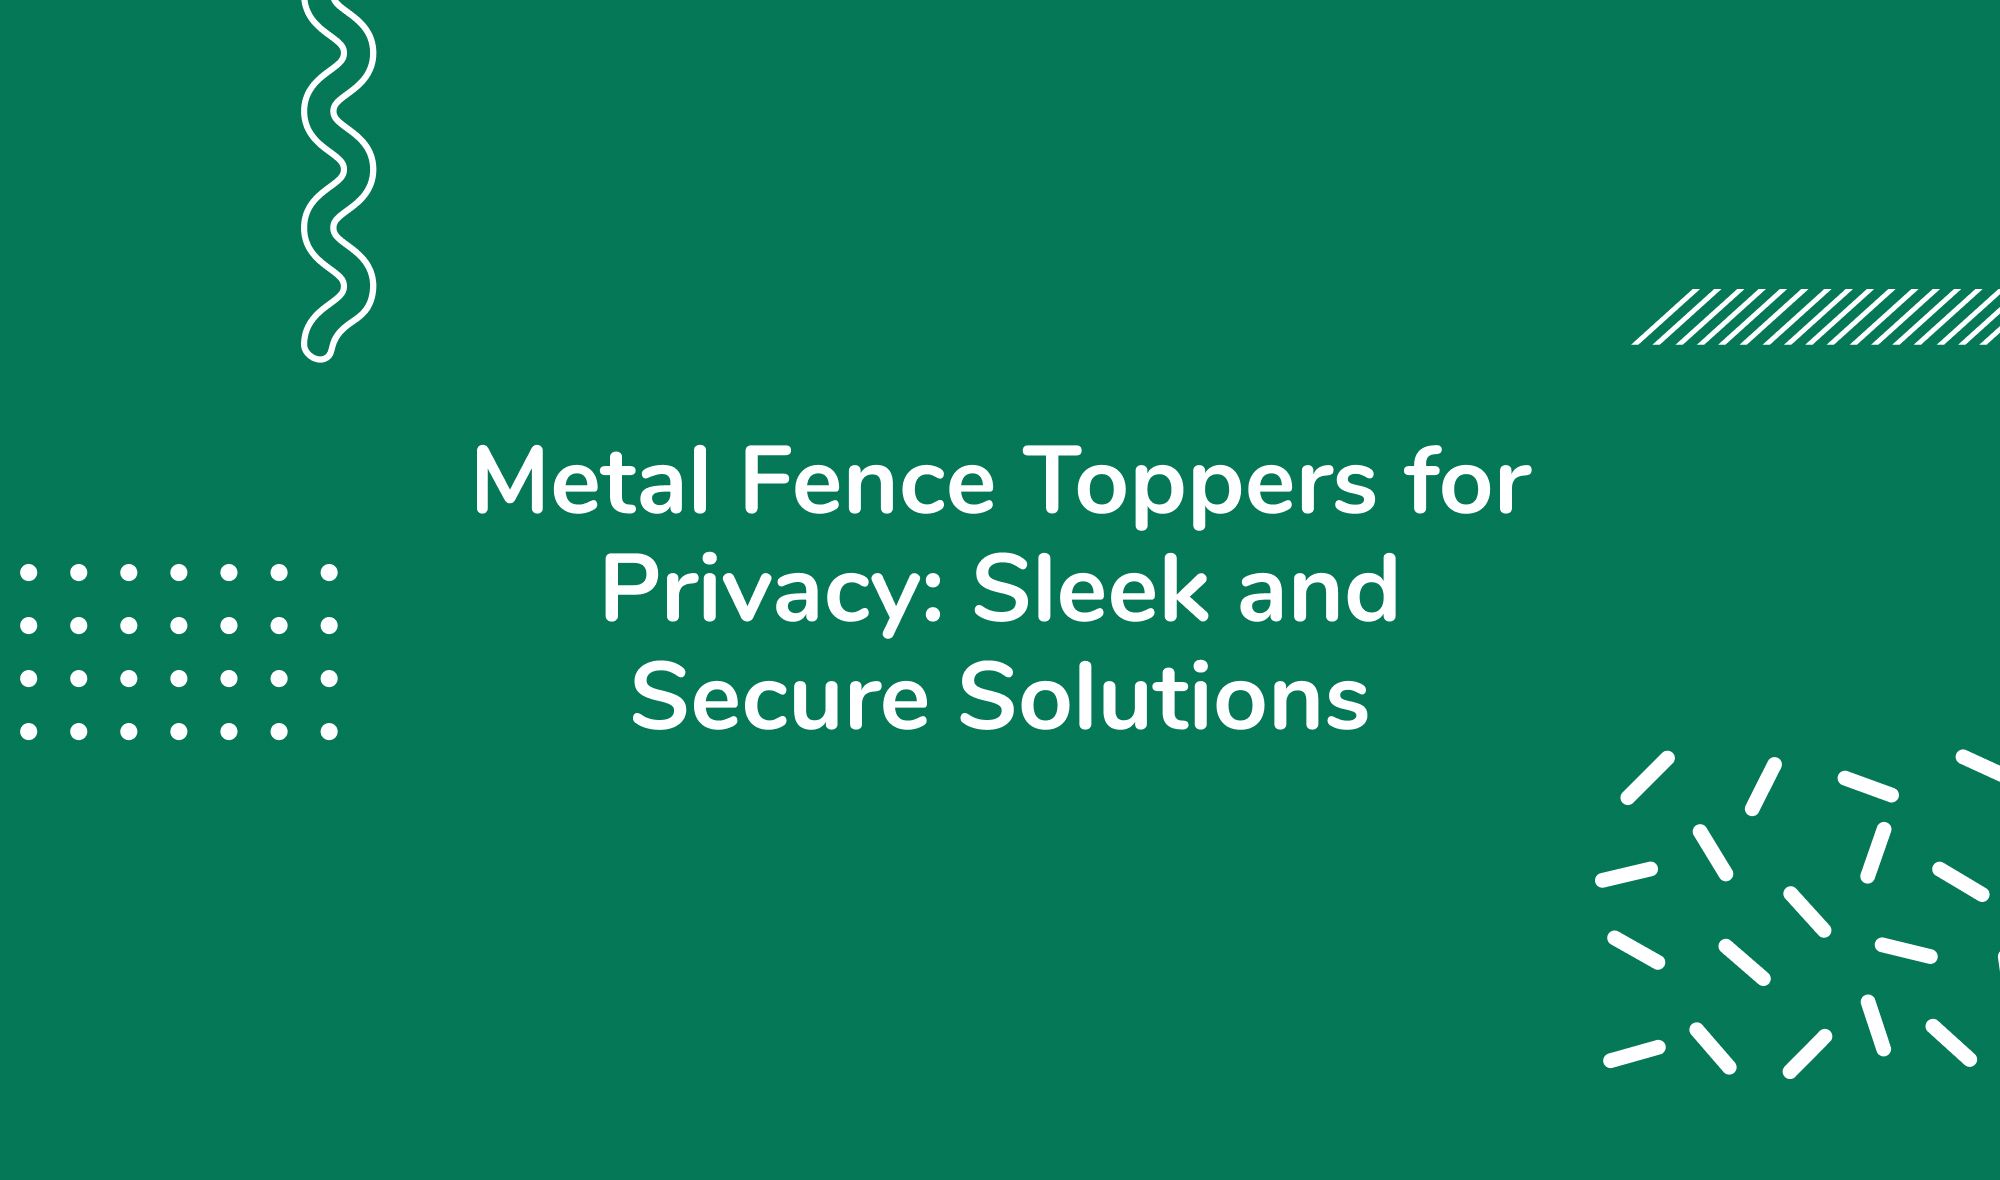 Metal Fence Toppers for Privacy: Sleek and Secure Solutions